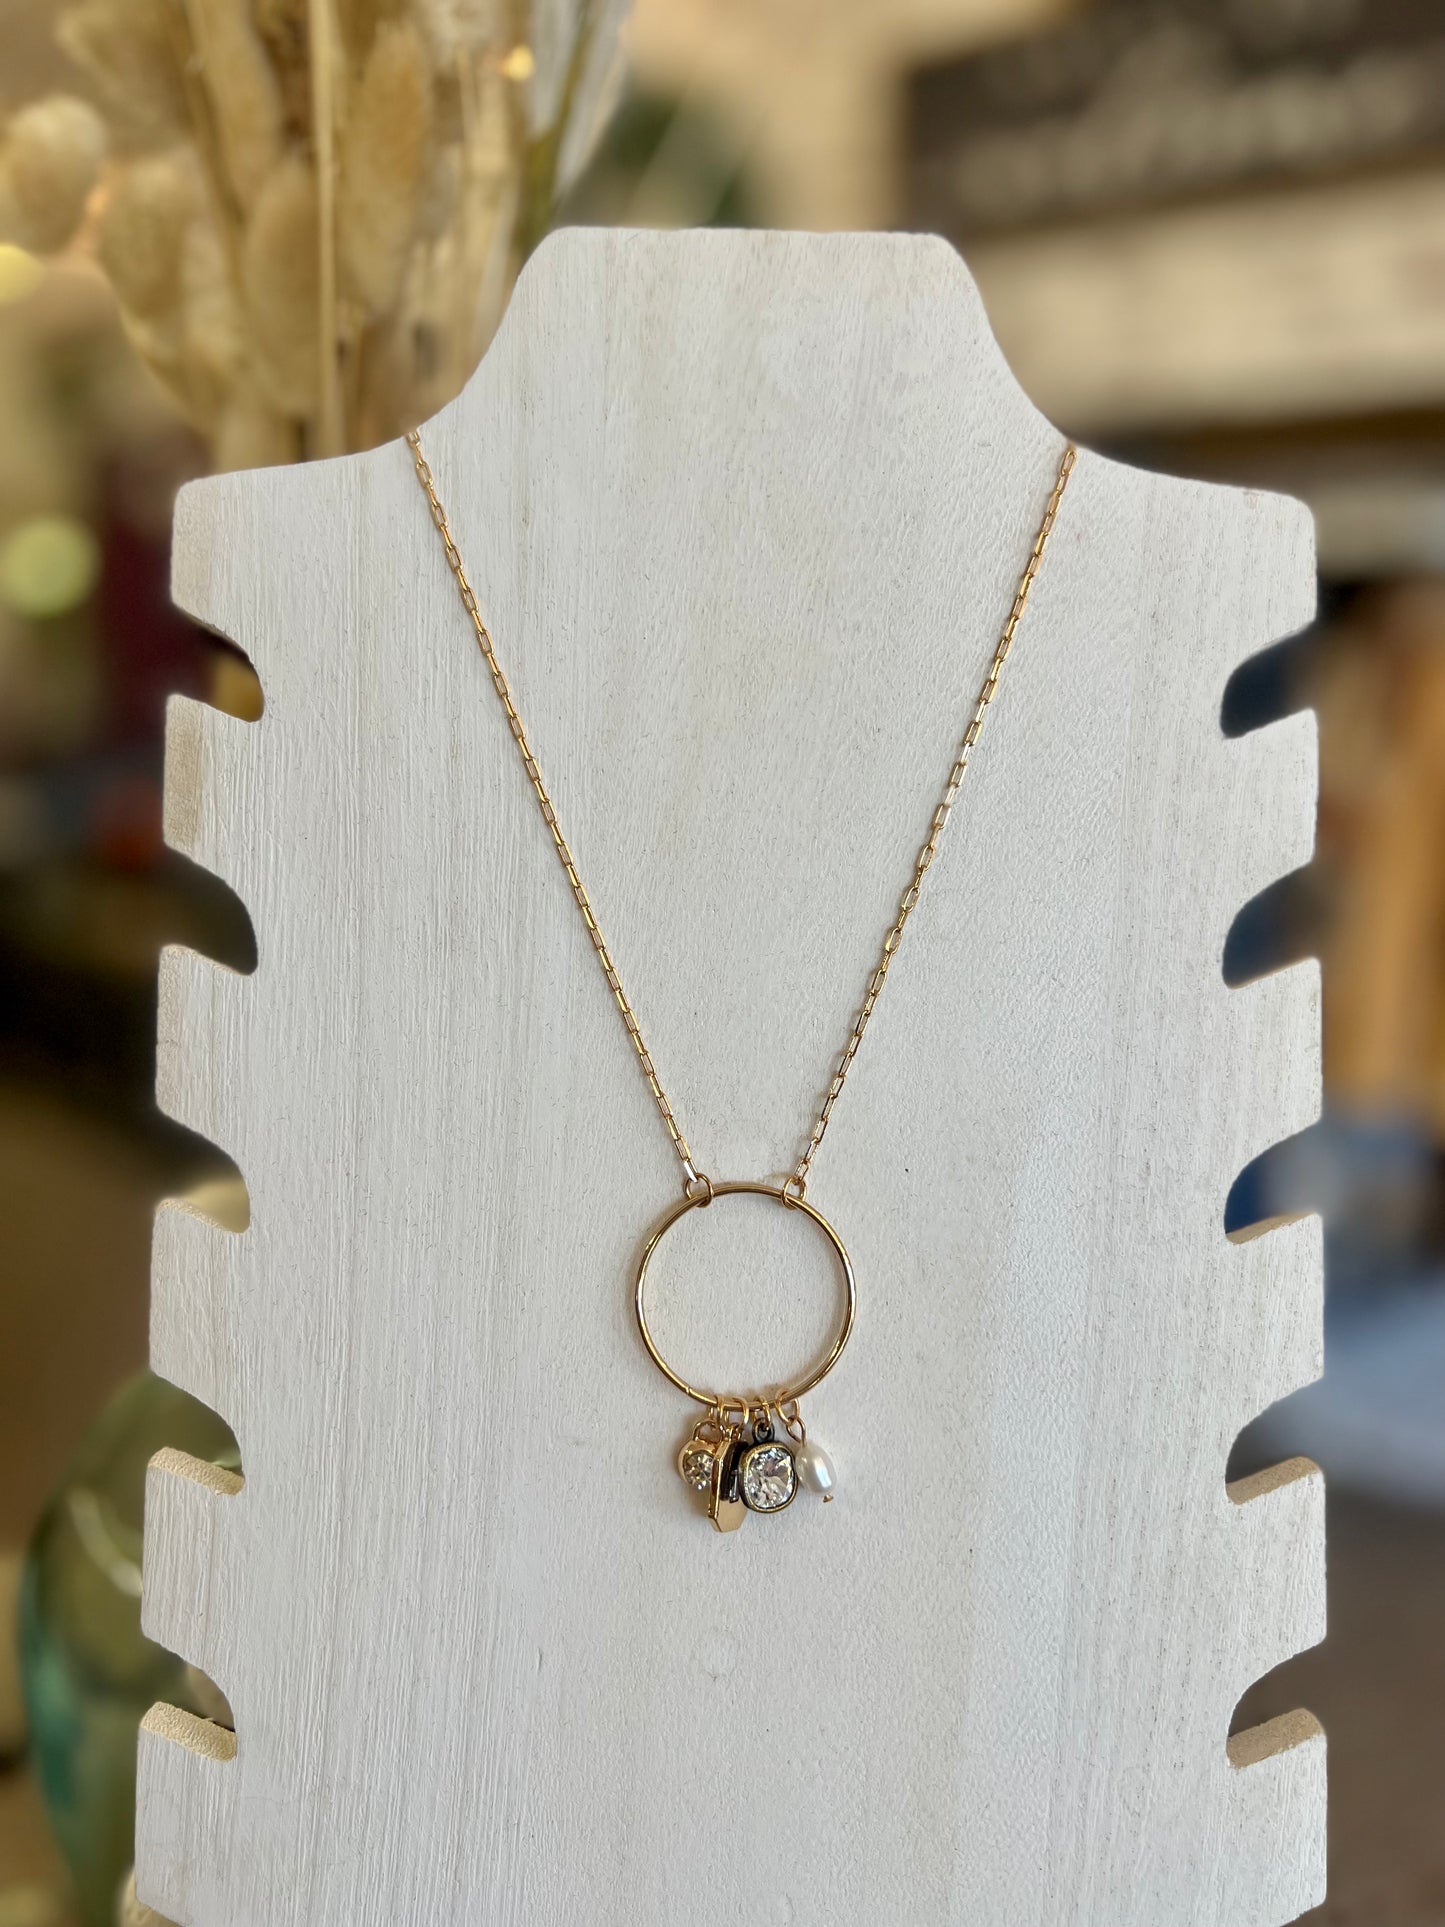 Ring of Charms Necklace